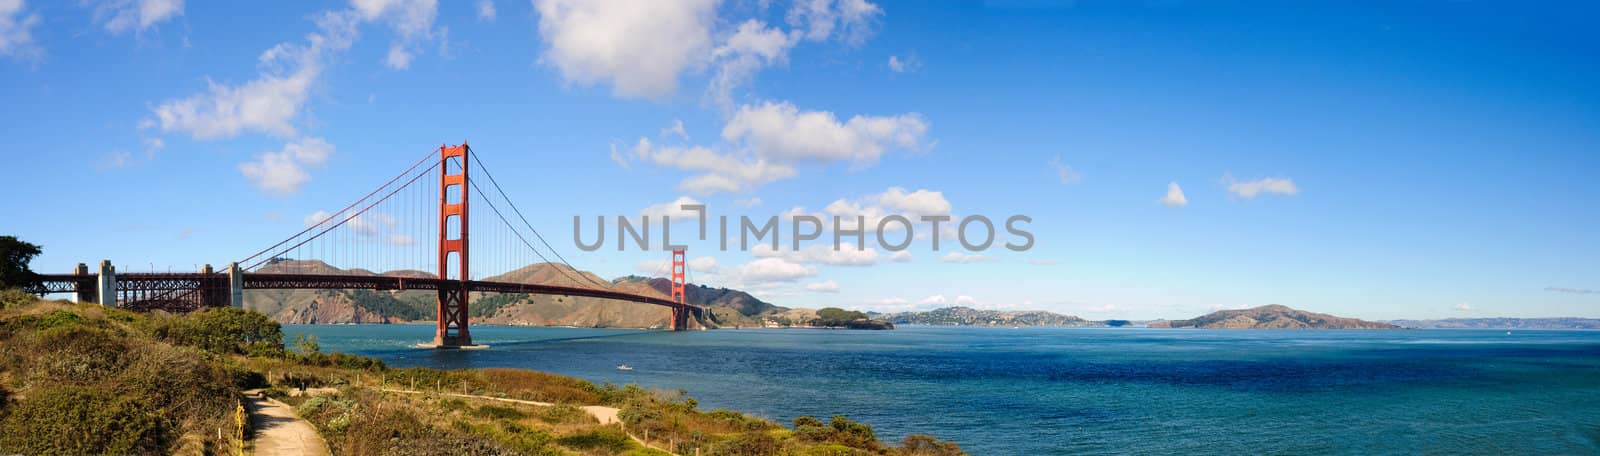 Panorama of Golden Gate and Bay by jeffbanke